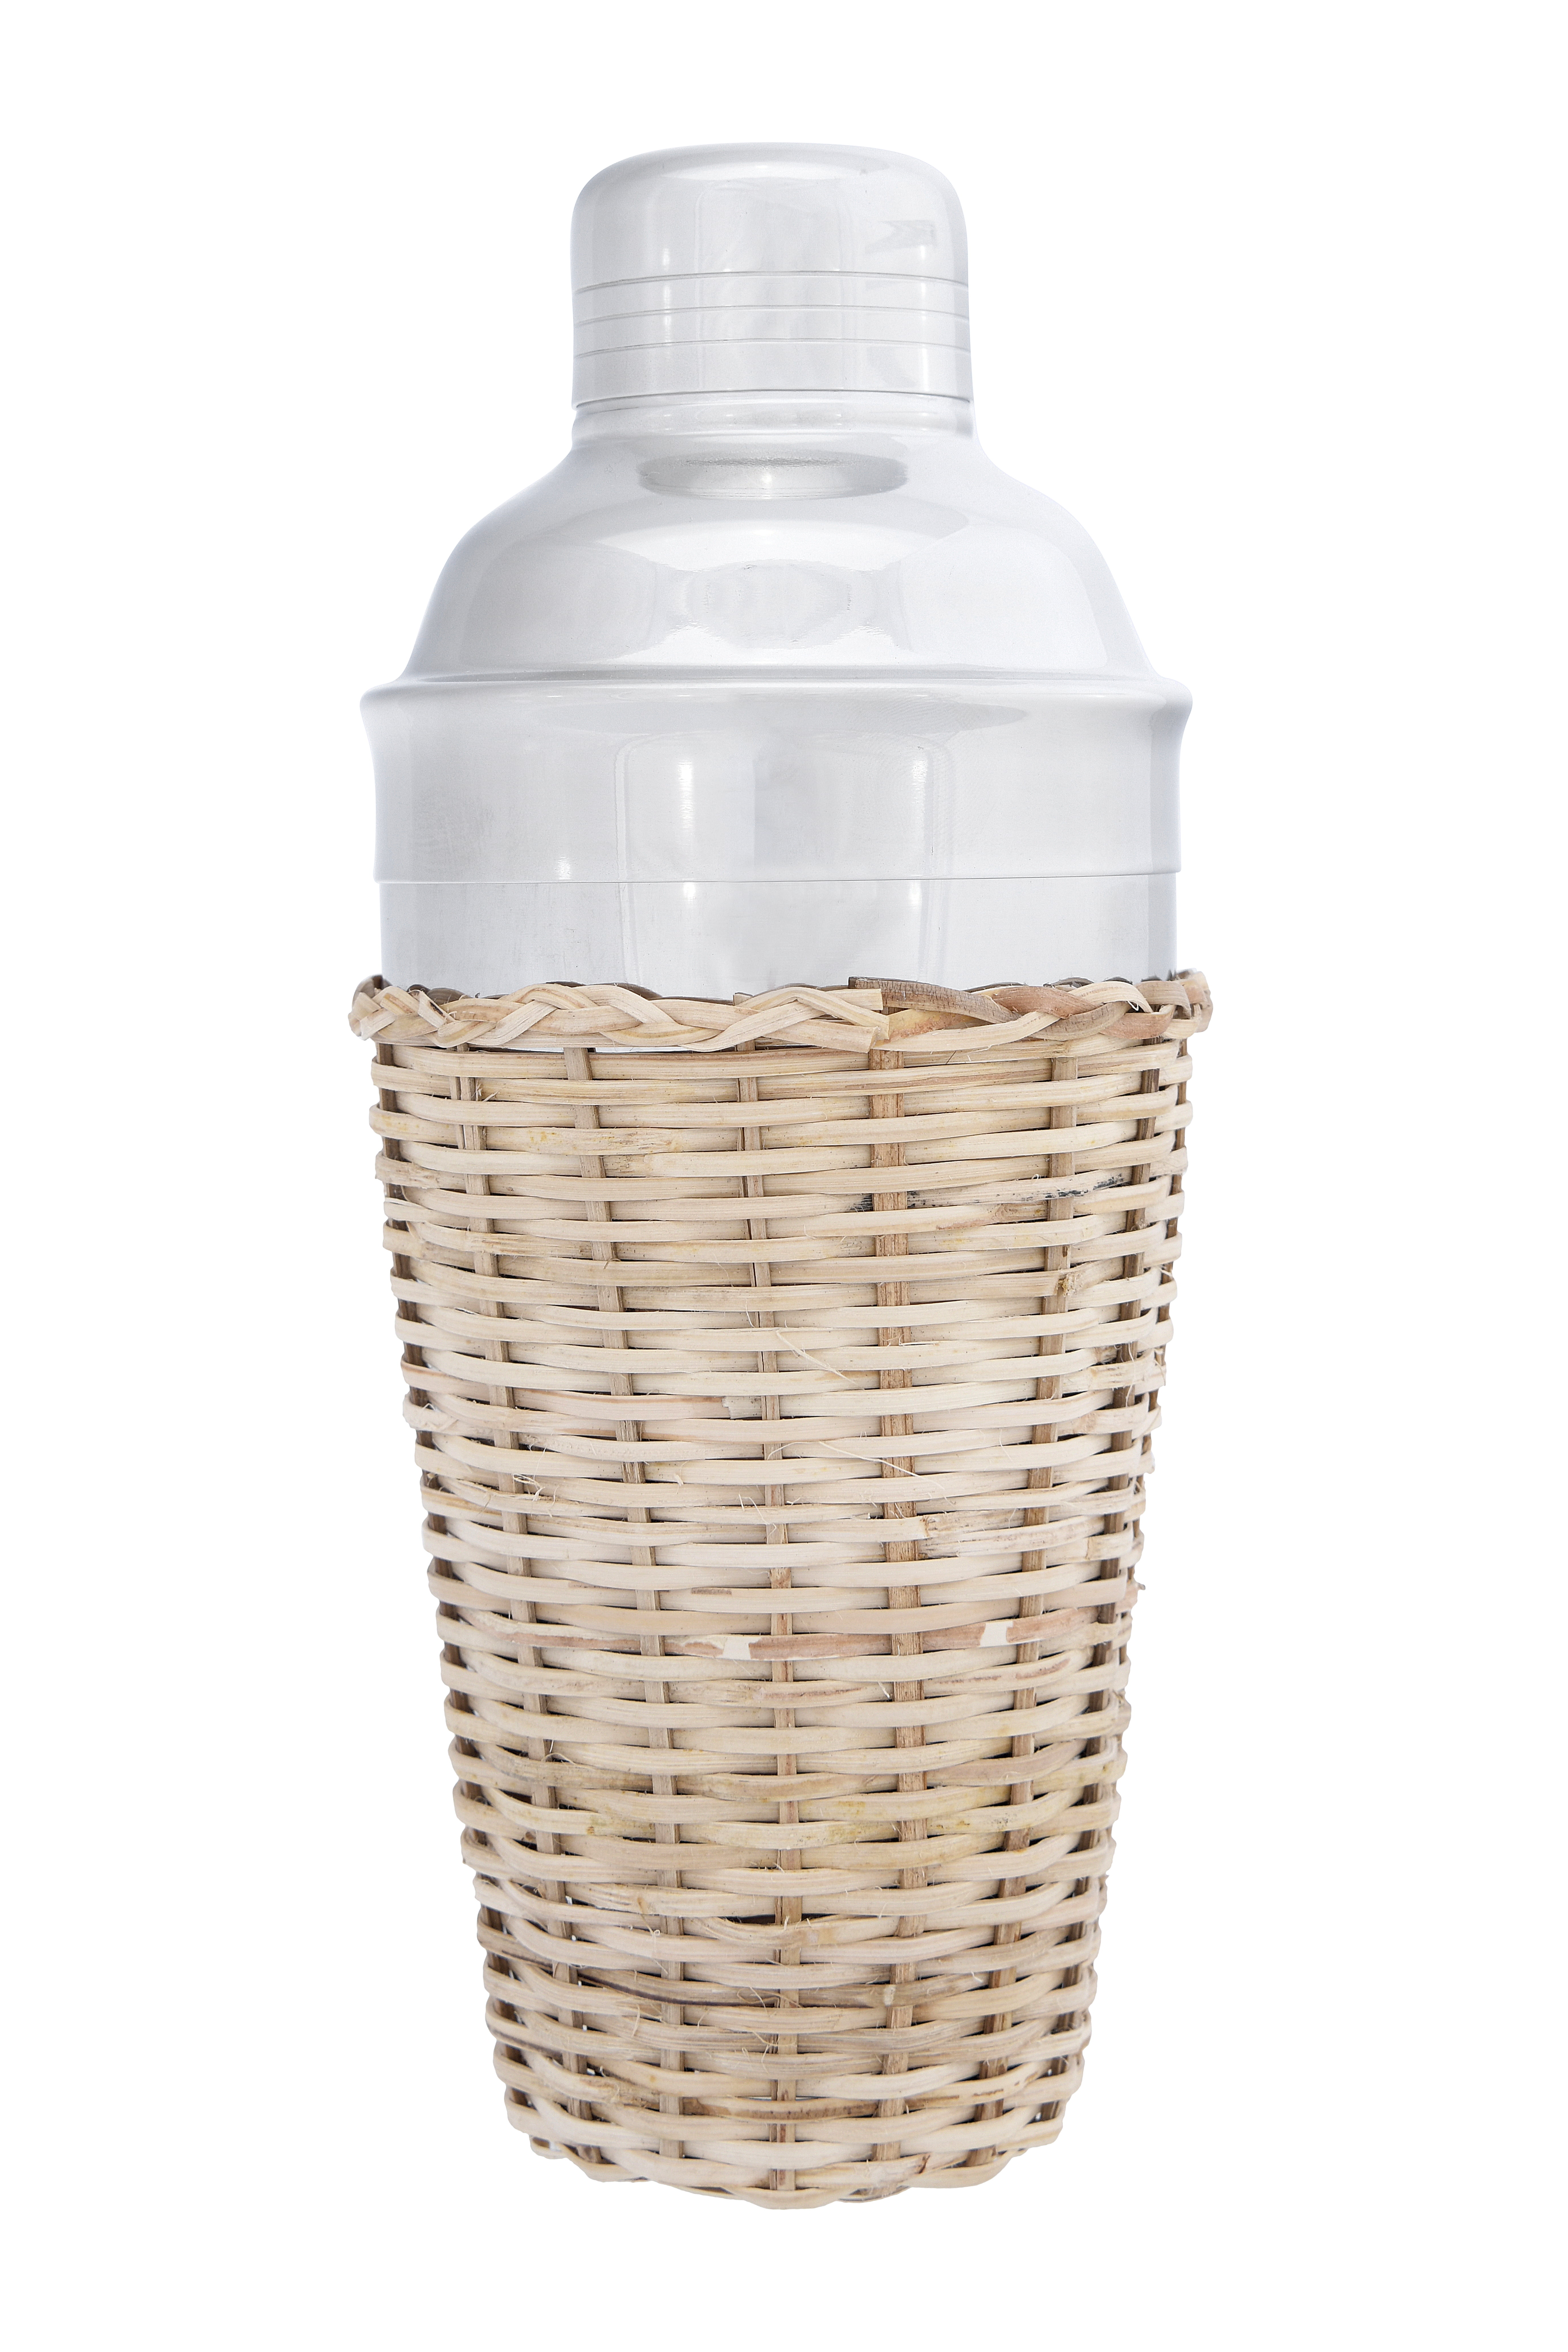 17 oz Cocktail Shaker in Stainless Steel with Woven Rattan Wicker Sleeve 